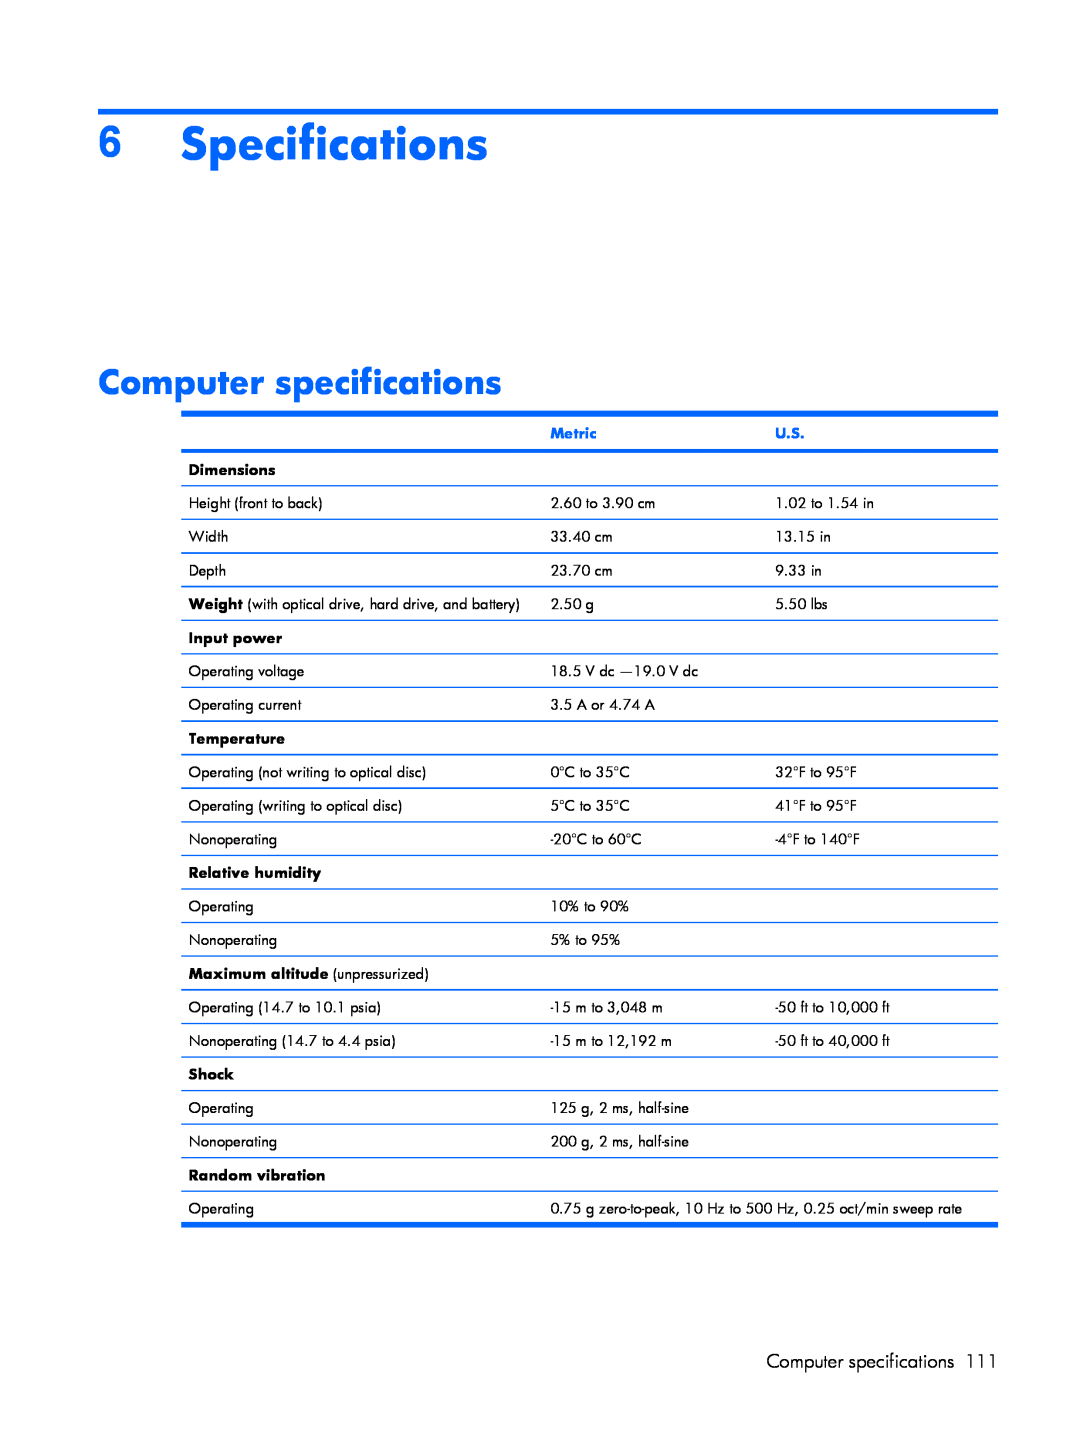 HP V3640AU, V3700 Specifications, Computer specifications, Dimensions, Input power, Temperature, Relative humidity, Shock 